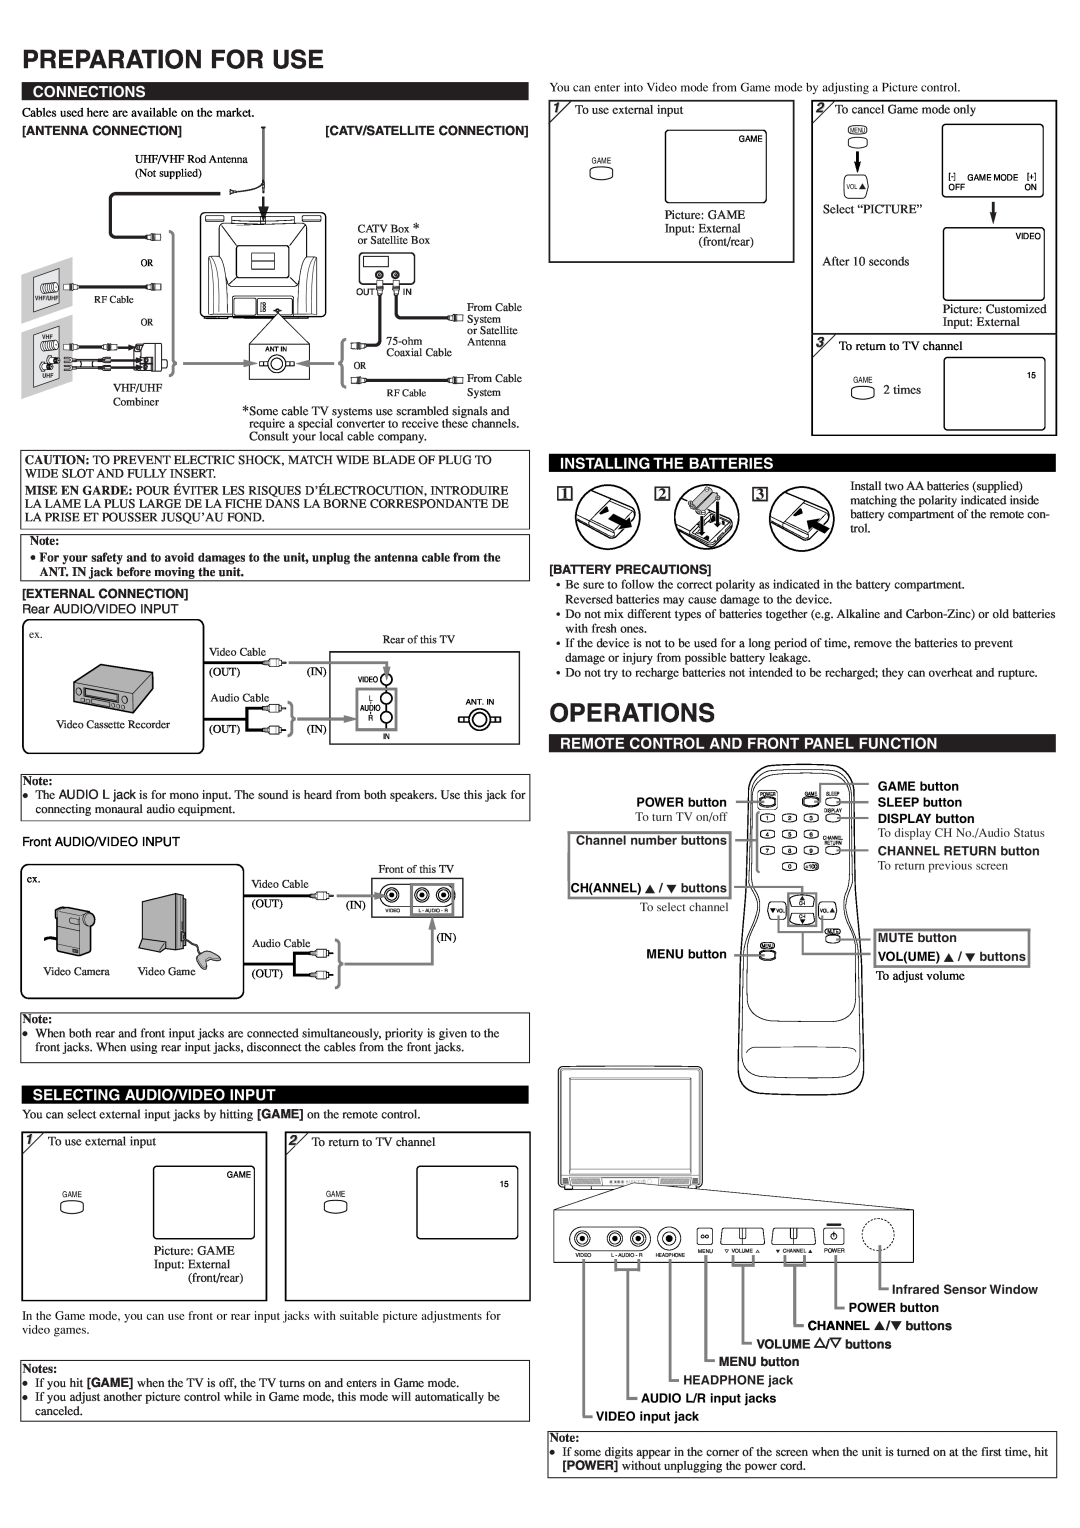 Sylvania 6427TF Preparation For Use, Operations, Connections, Installing The Batteries, Selecting Audio/Video Input 